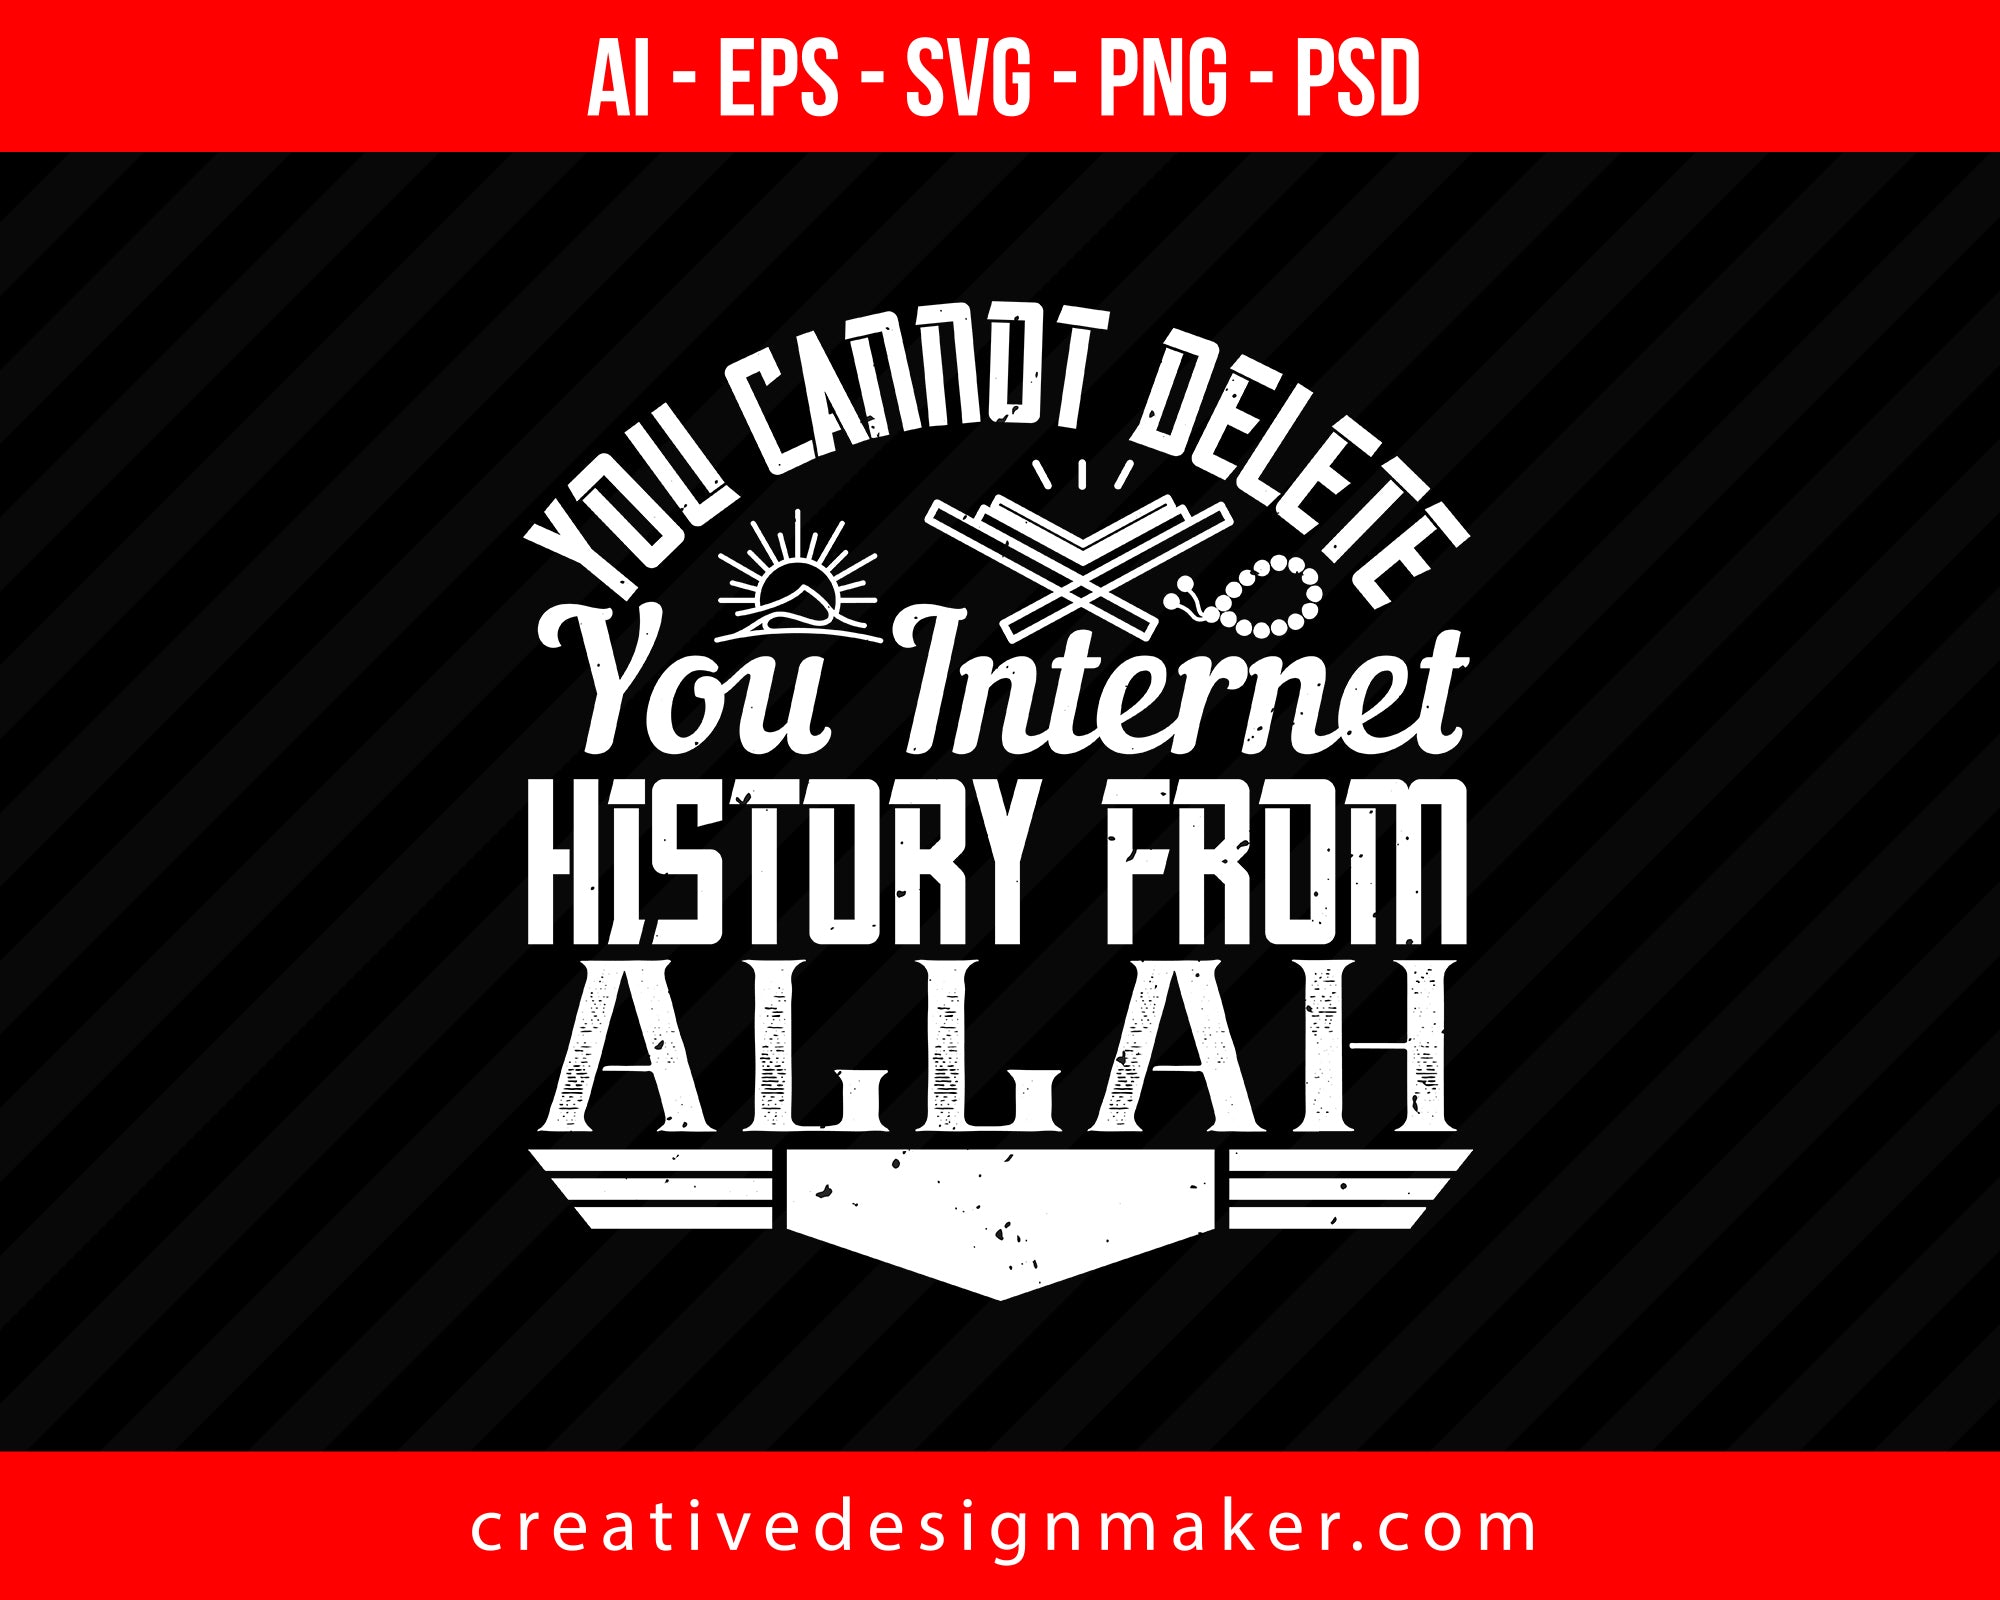 You Cannot Delete you internet history from ALLAH Islamic Print Ready Editable T-Shirt SVG Design!